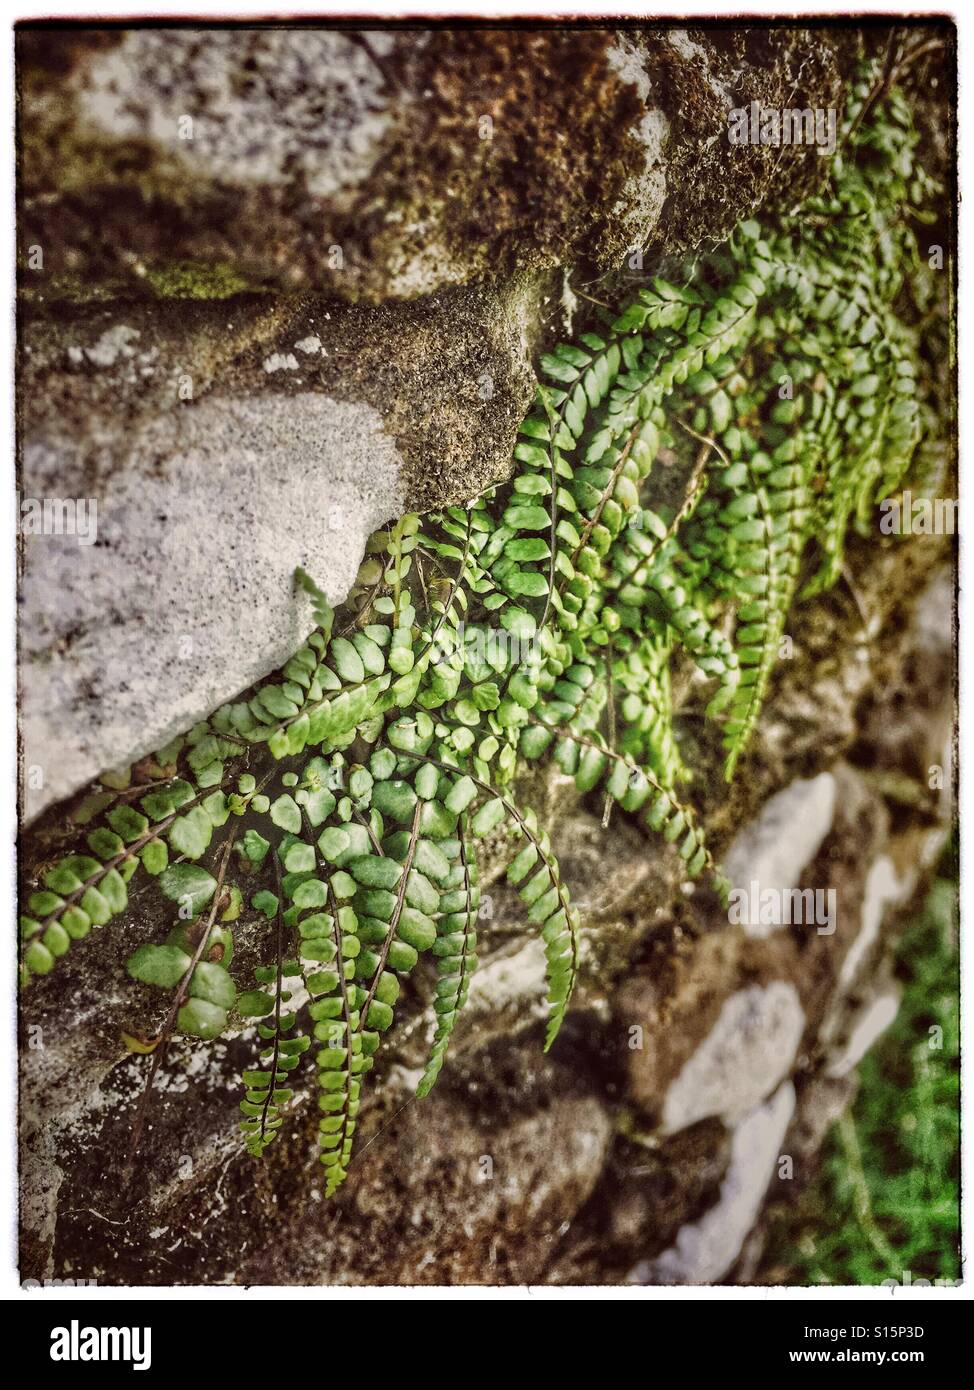 Ferns growing on a rocky wall Stock Photo